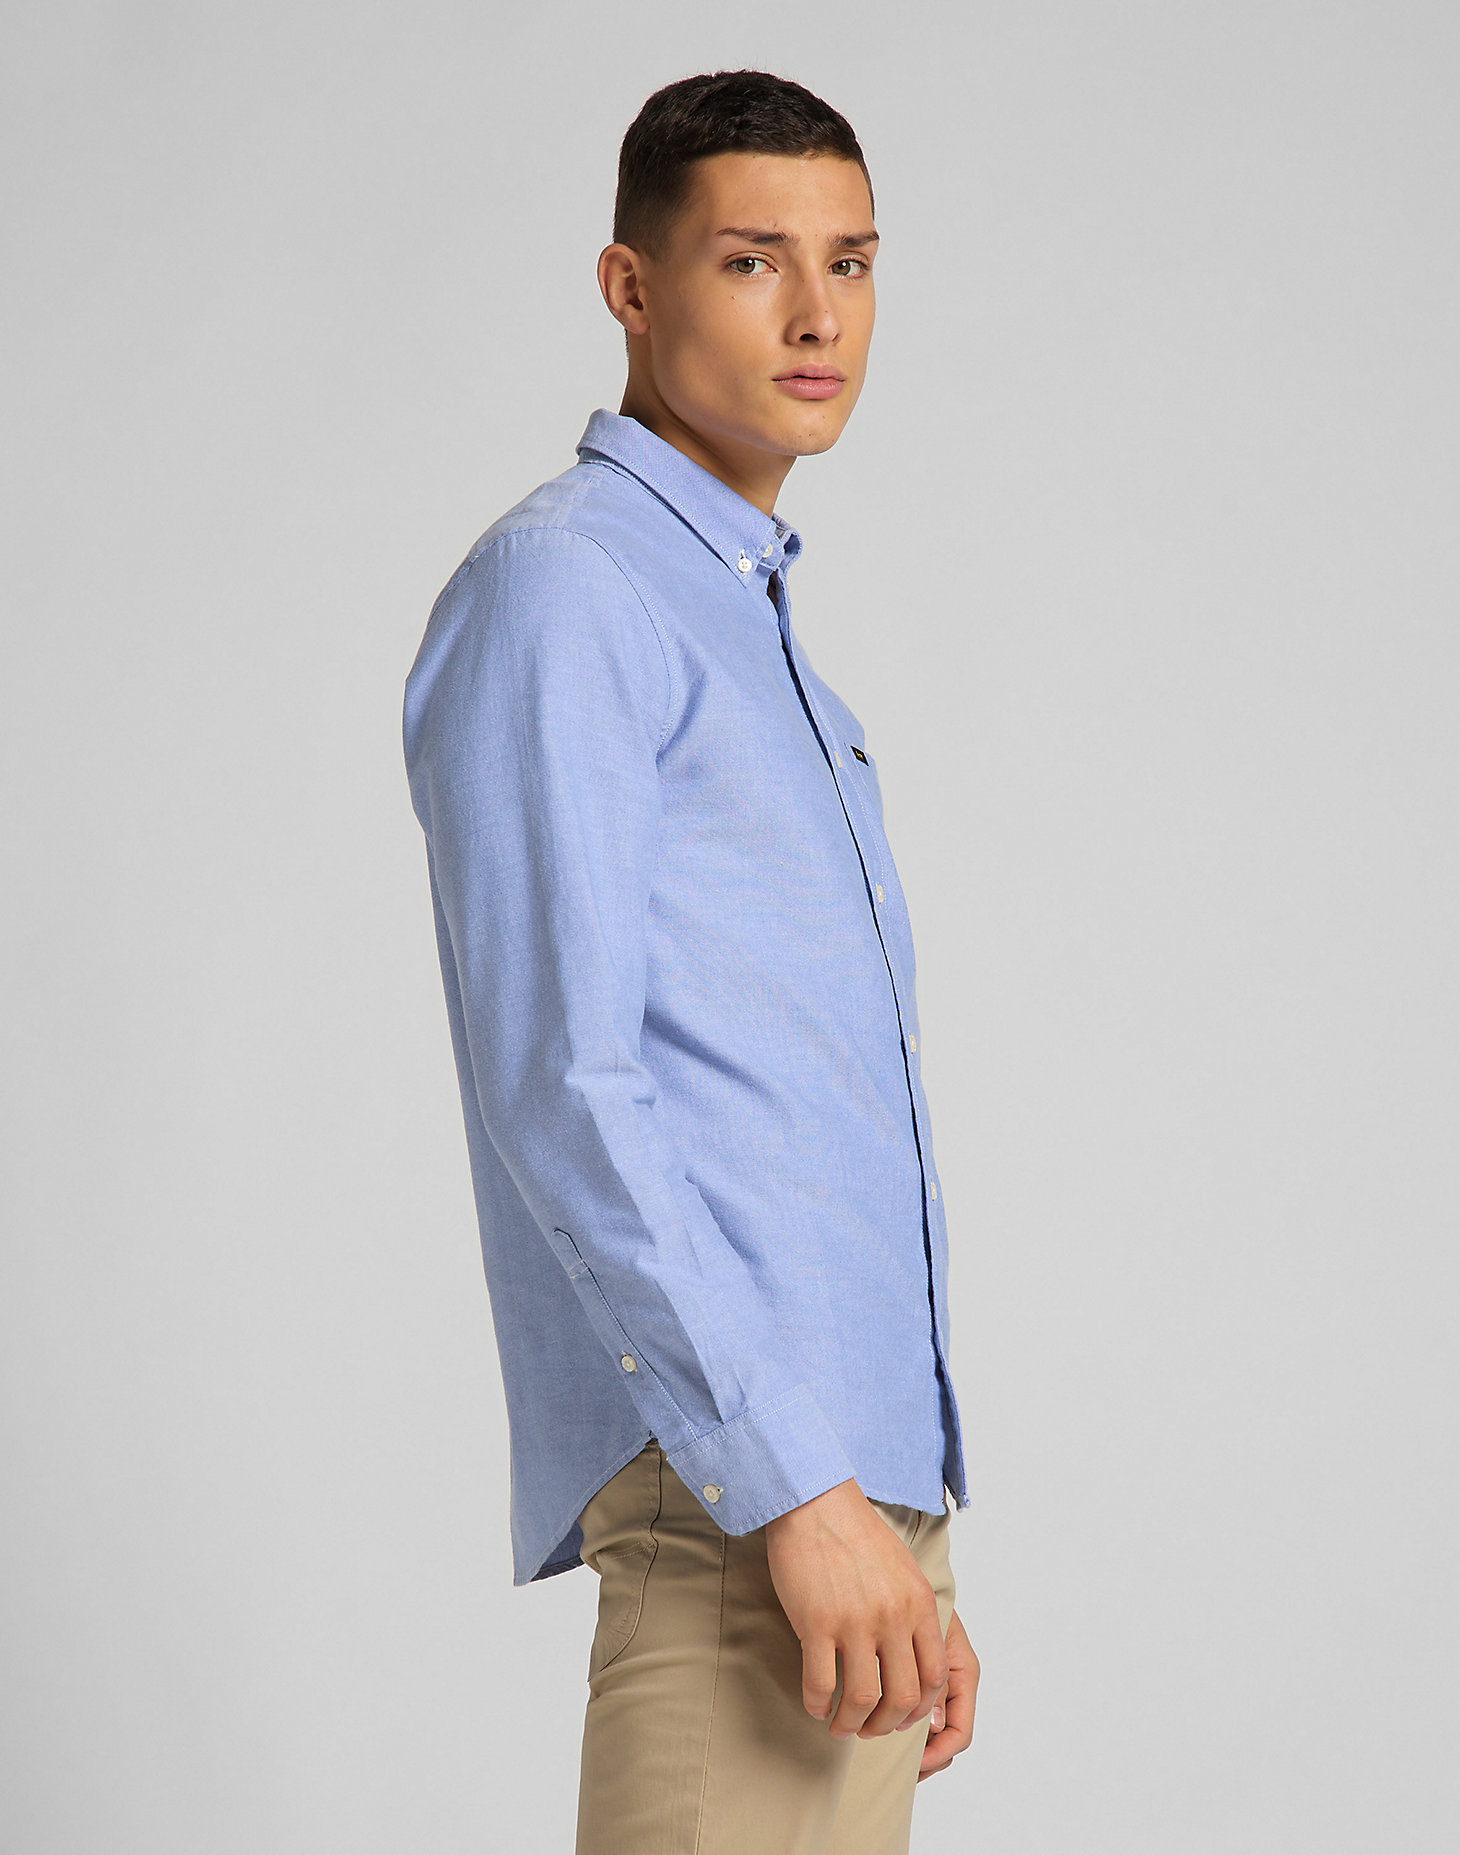 Button Down Shirt in Washed Blue alternative view 3